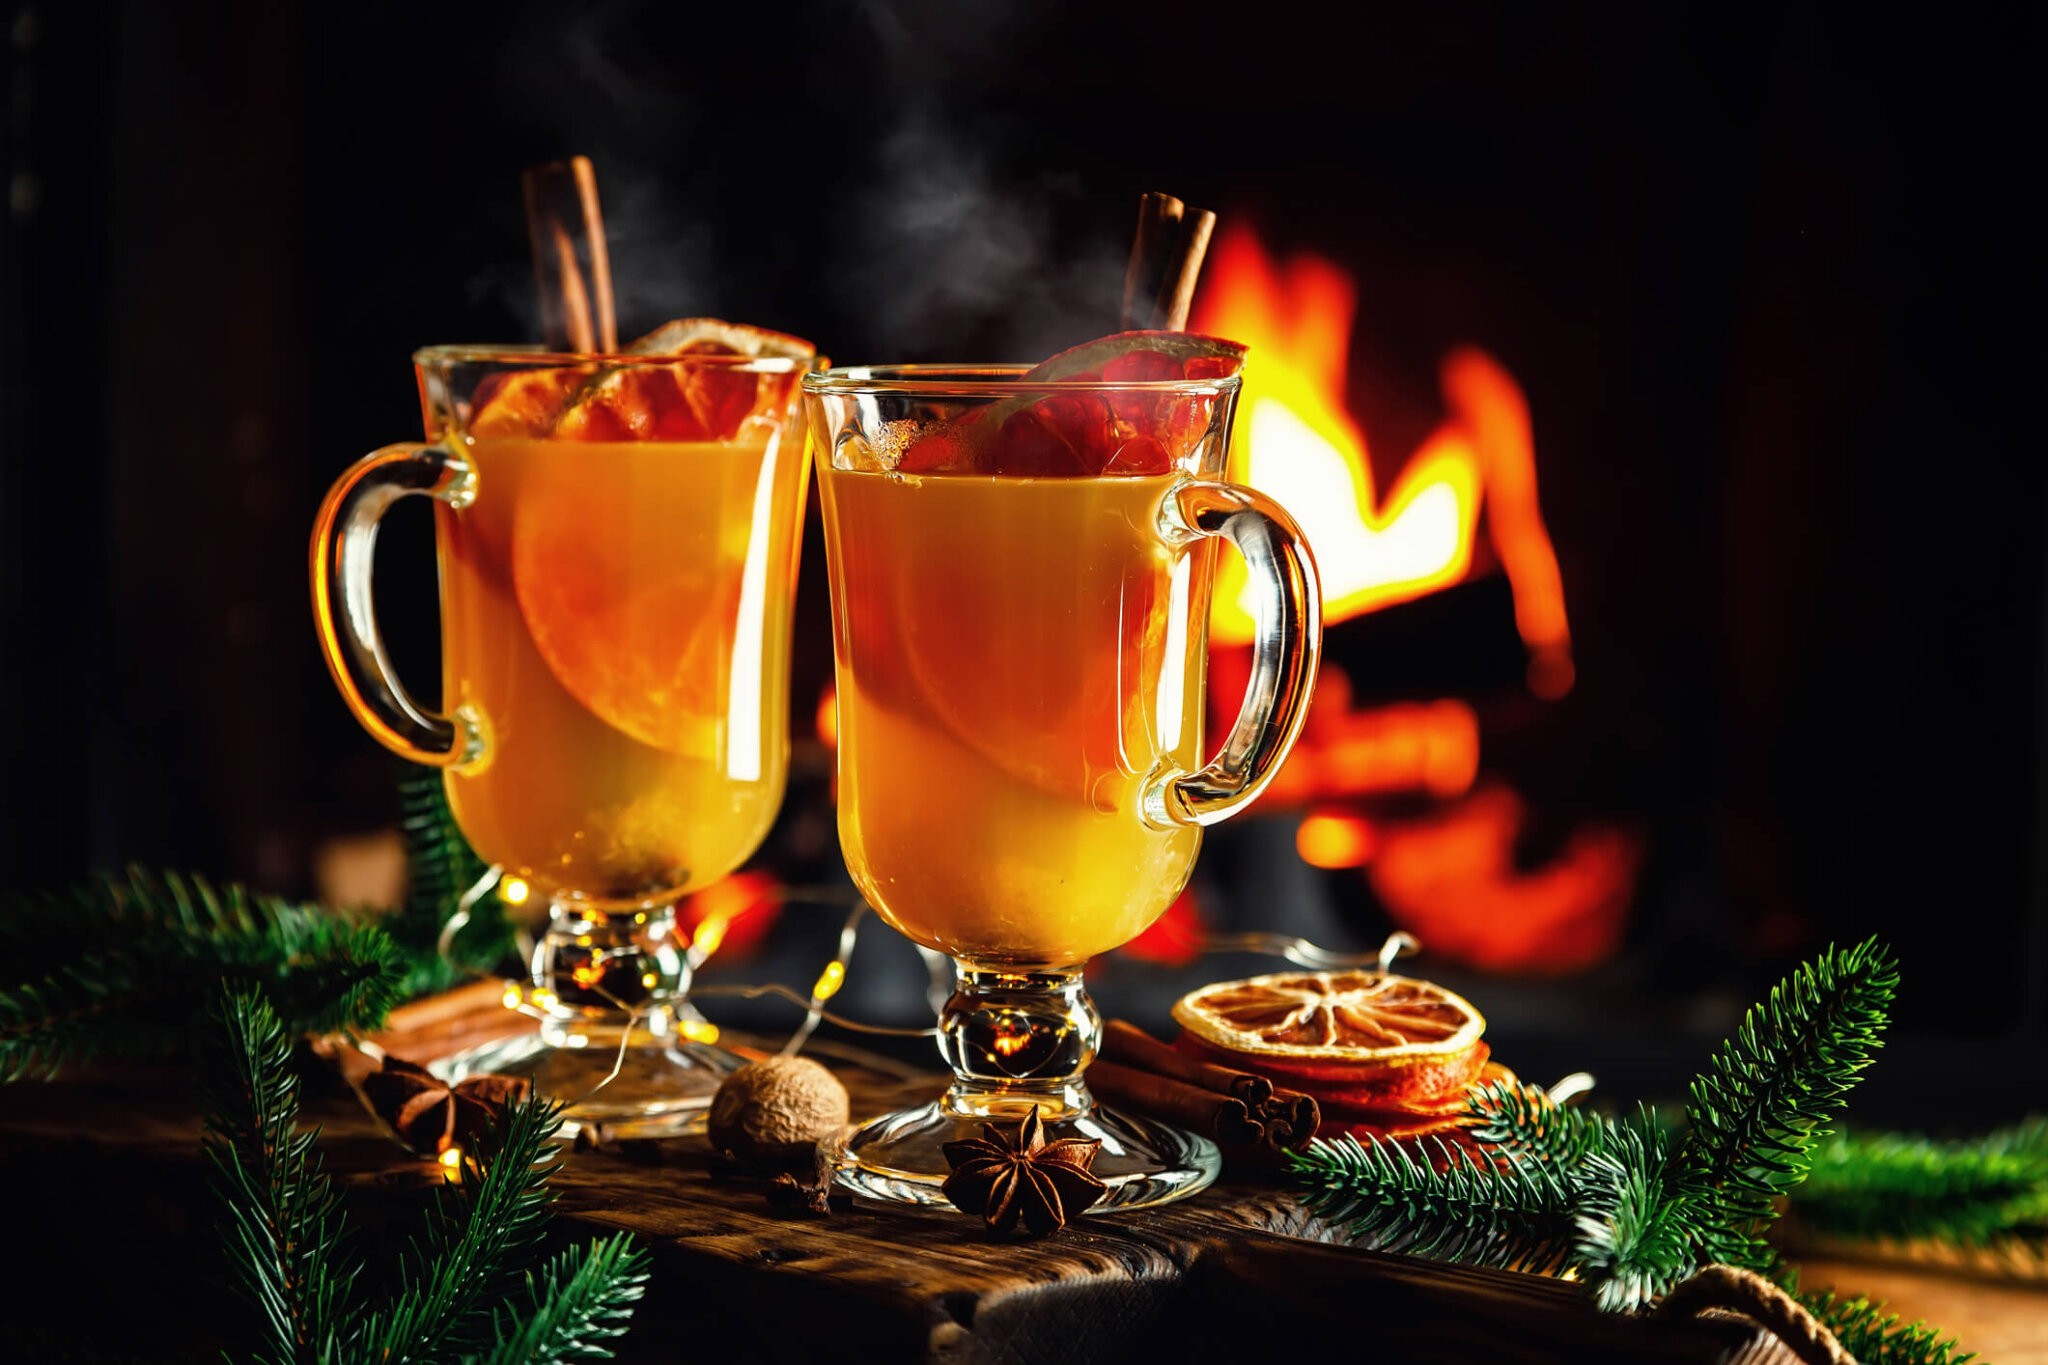 Mulled cider glasses on the background of fireplace fire. Hot mulled spiced apple cider cocktail for winter or autumn time.